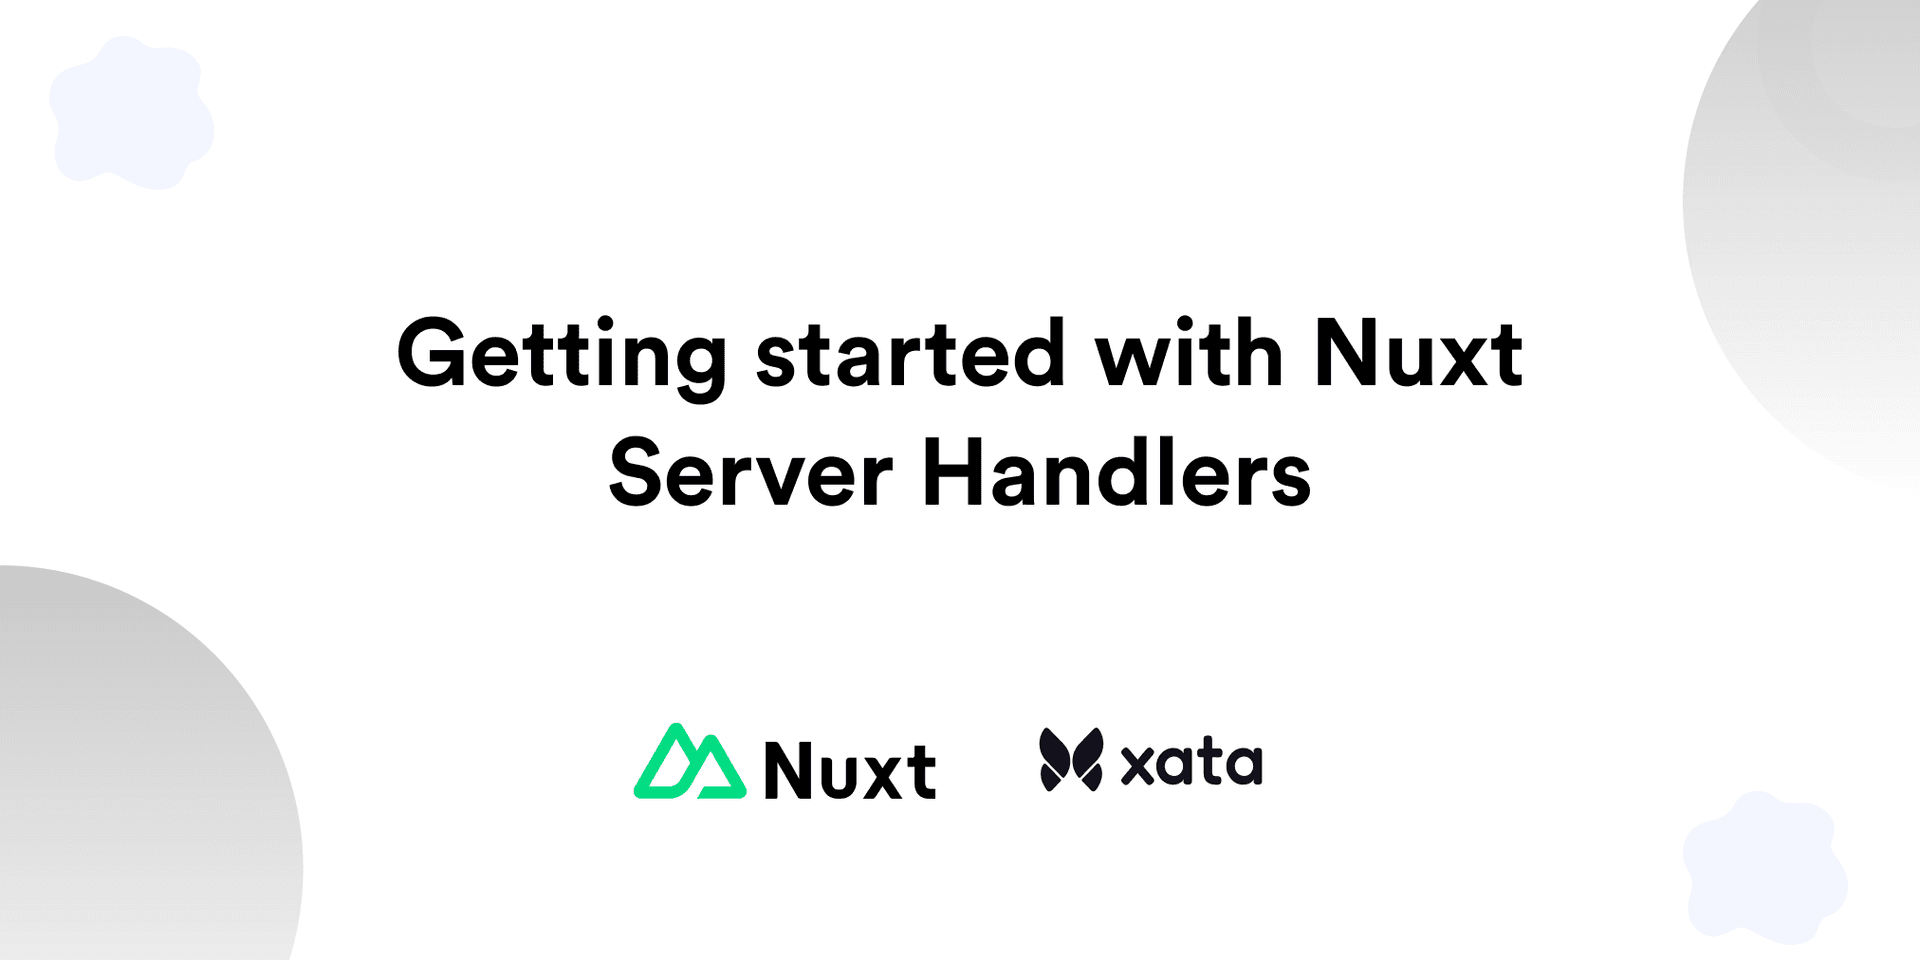 Getting started with Nuxt Server Handlers's image